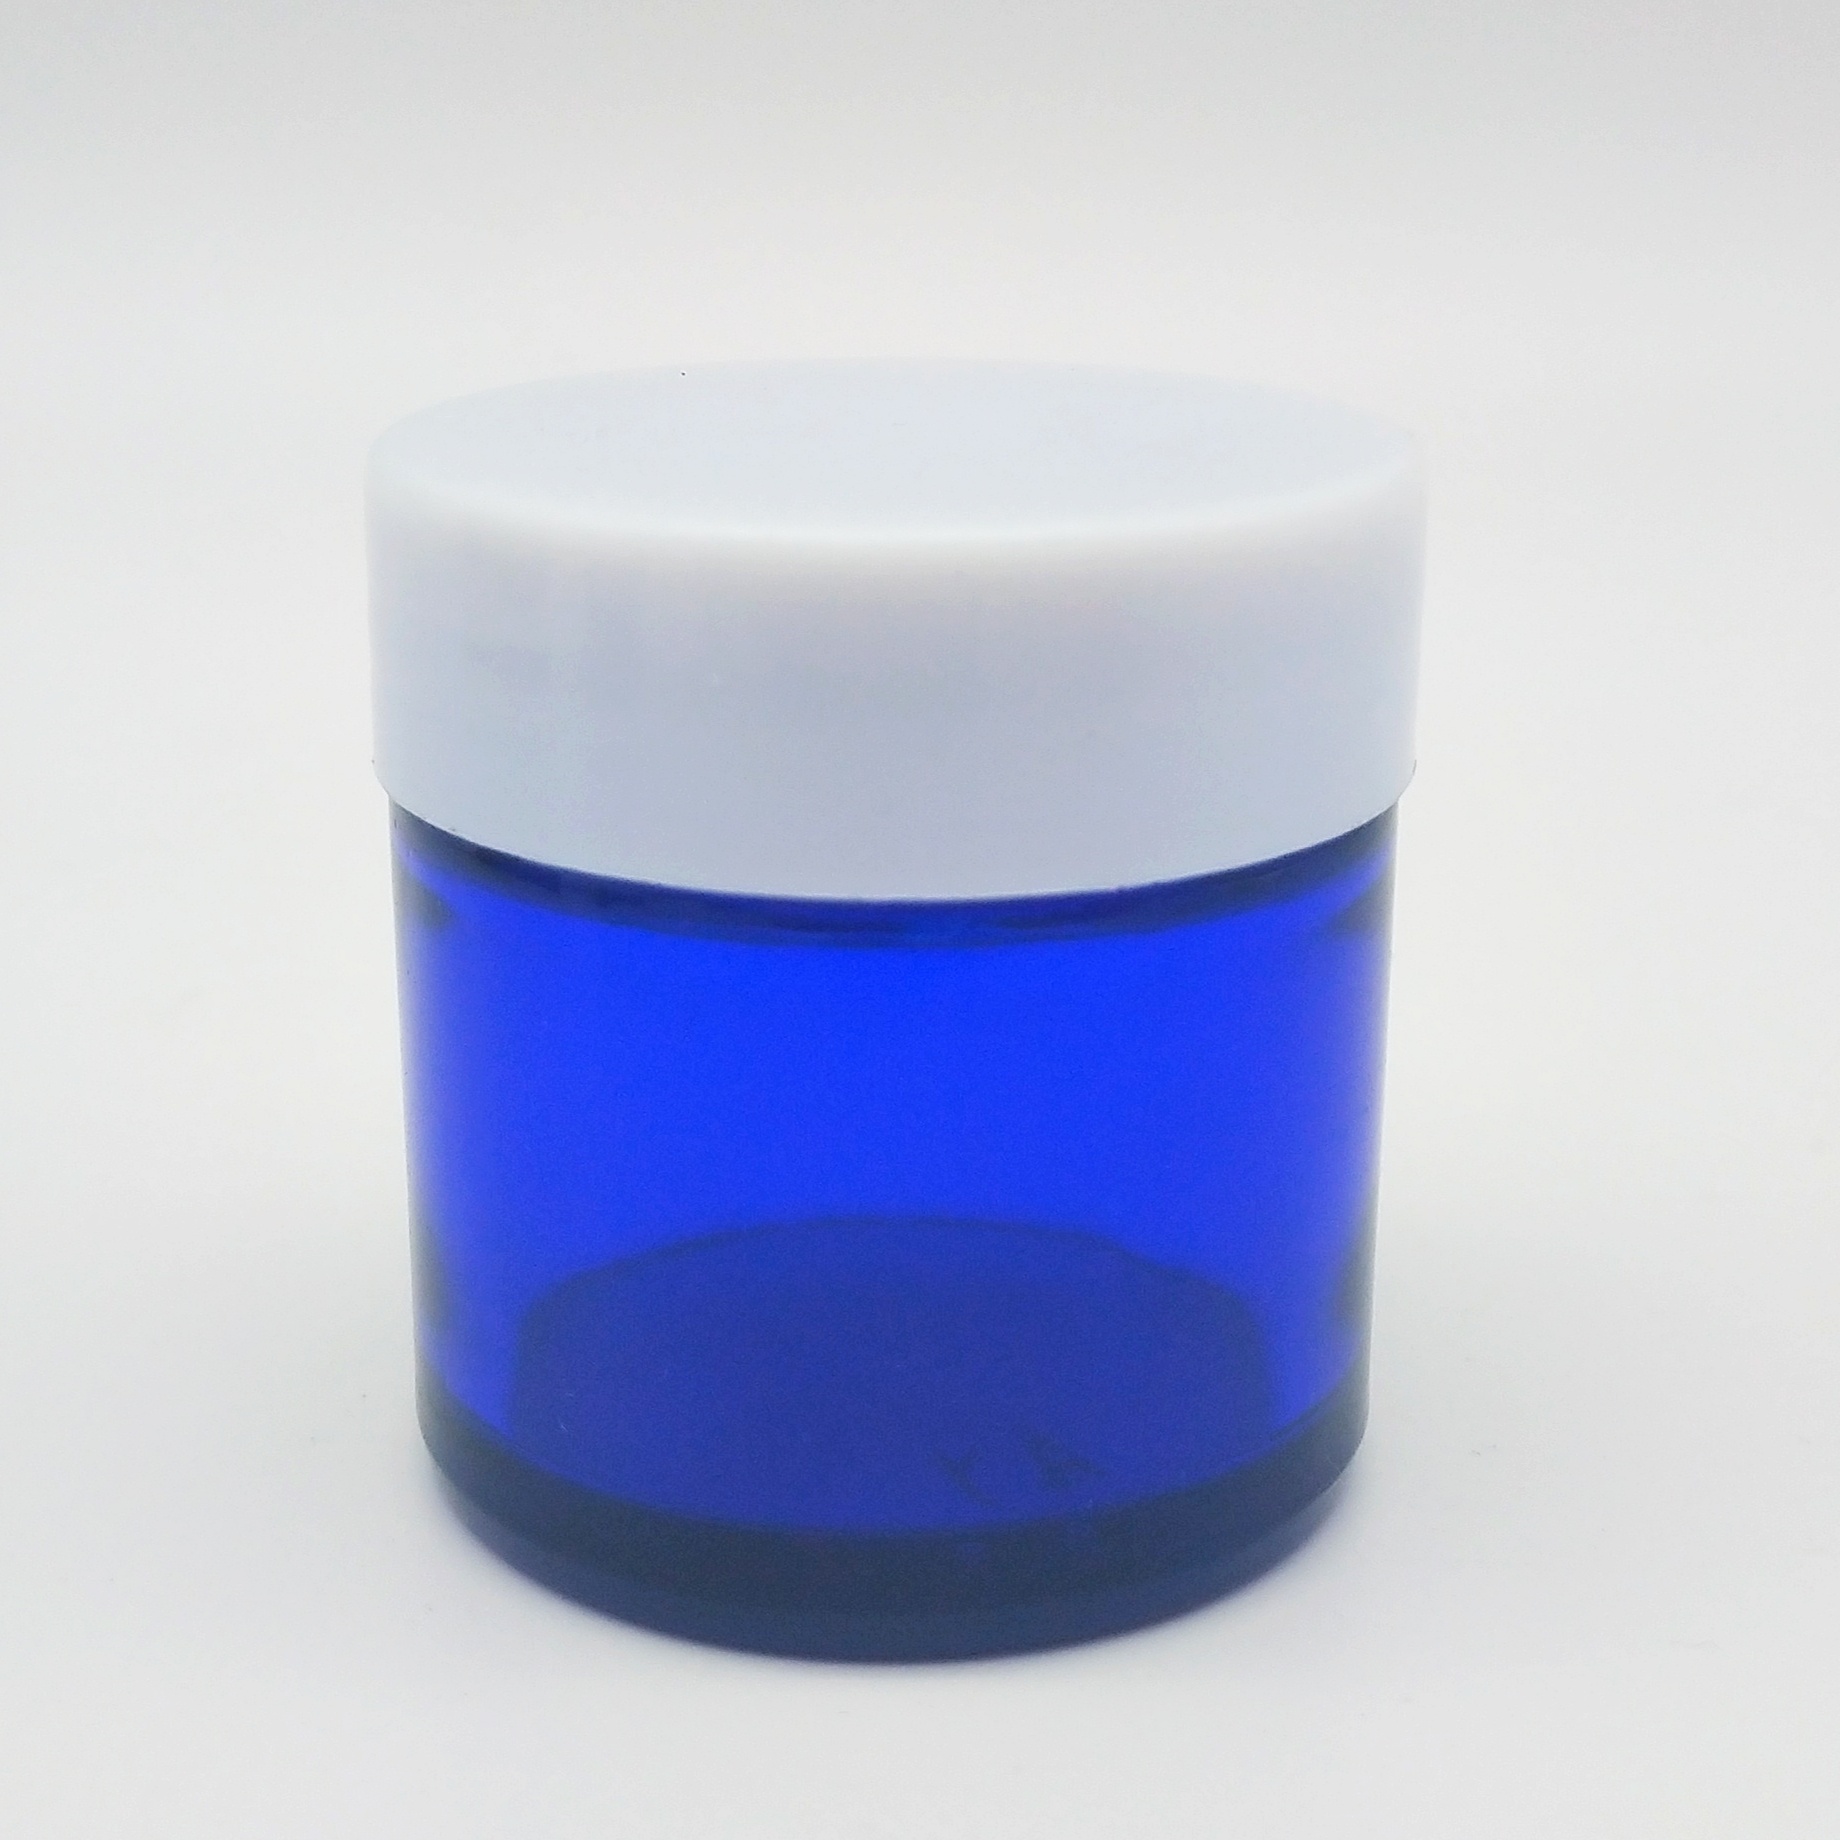 China wholesale Plastic Closure - MBK Packaging 30ml Round Blue Glass Lotion Cream Jar With Screw Top Lid – Menbank